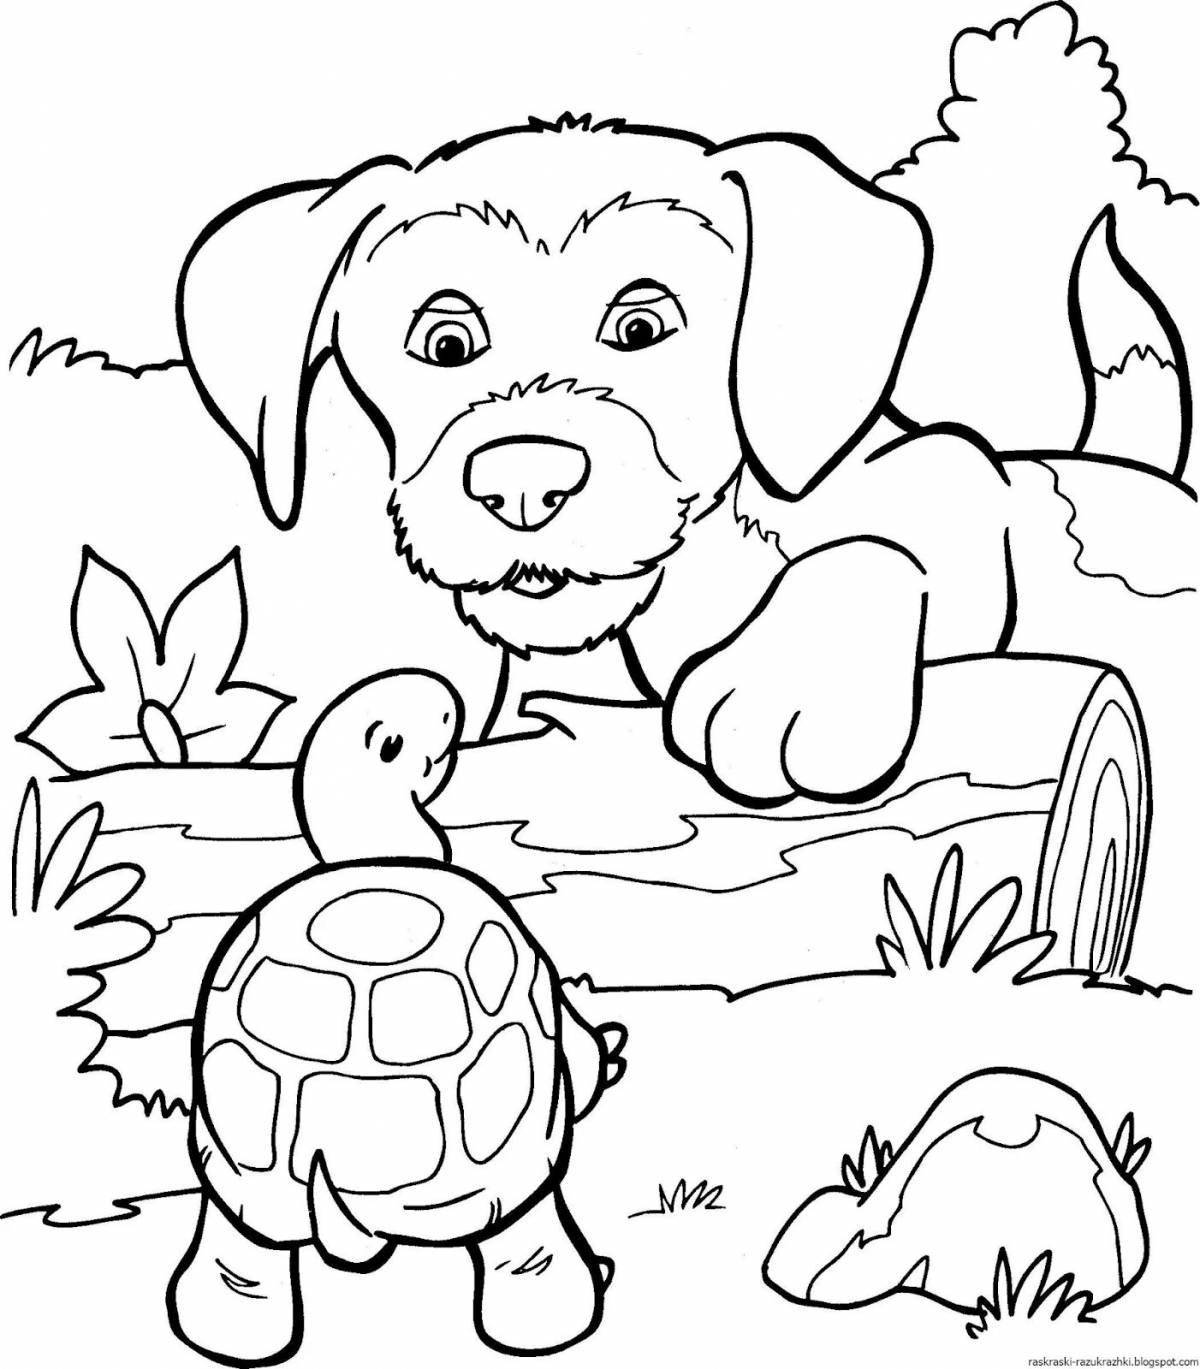 Affectionate coloring puppy for kids